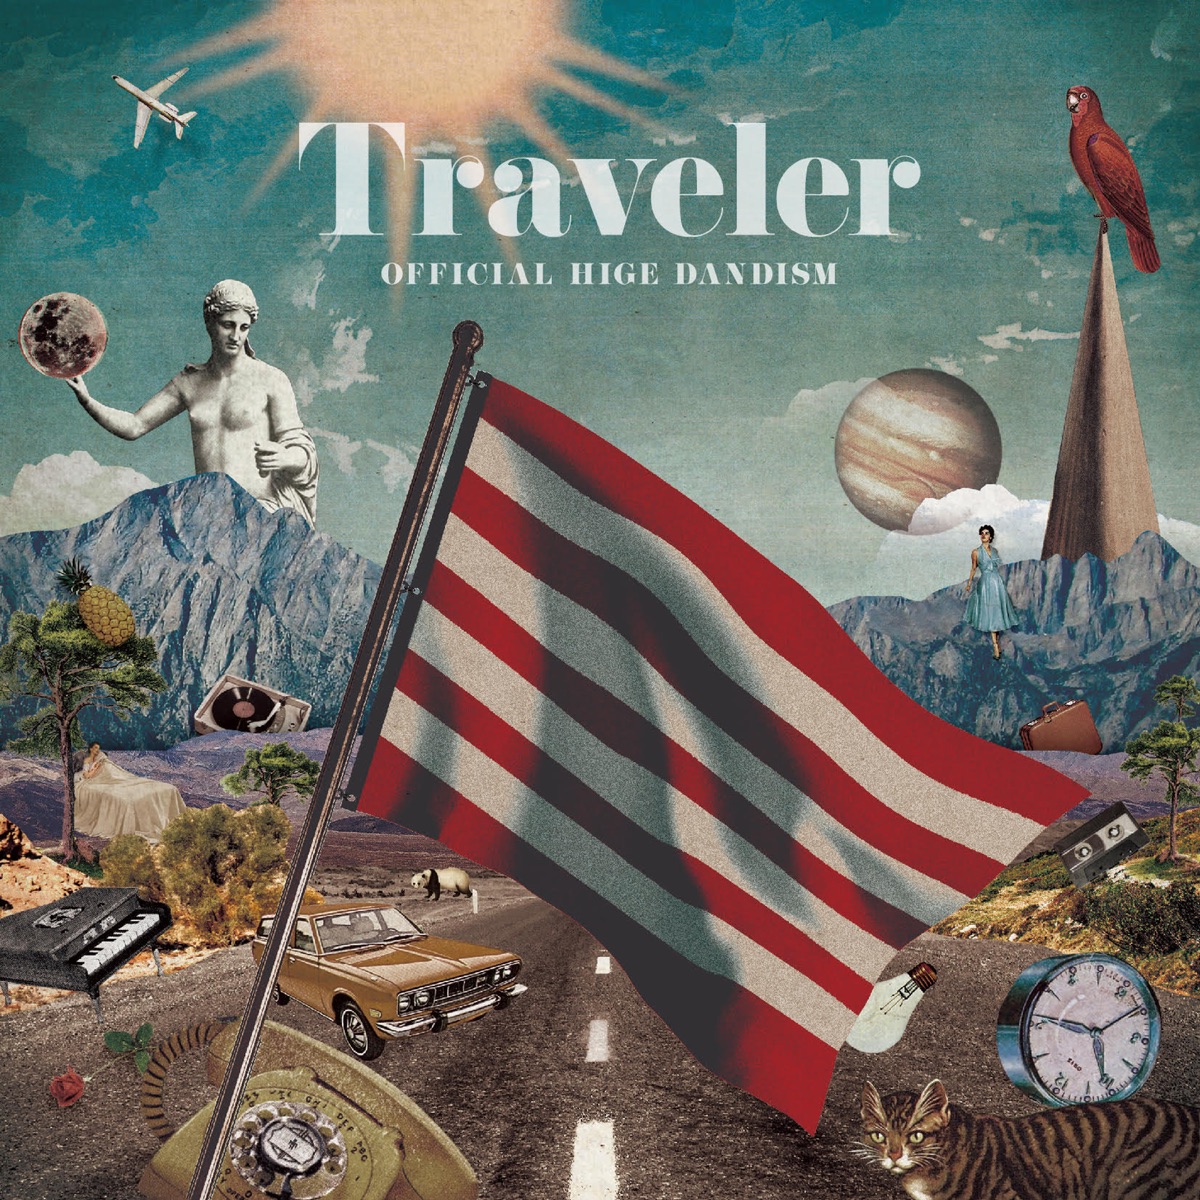 Cover for『Official HIGE DANdism - Vintage』from the release『Traveler』